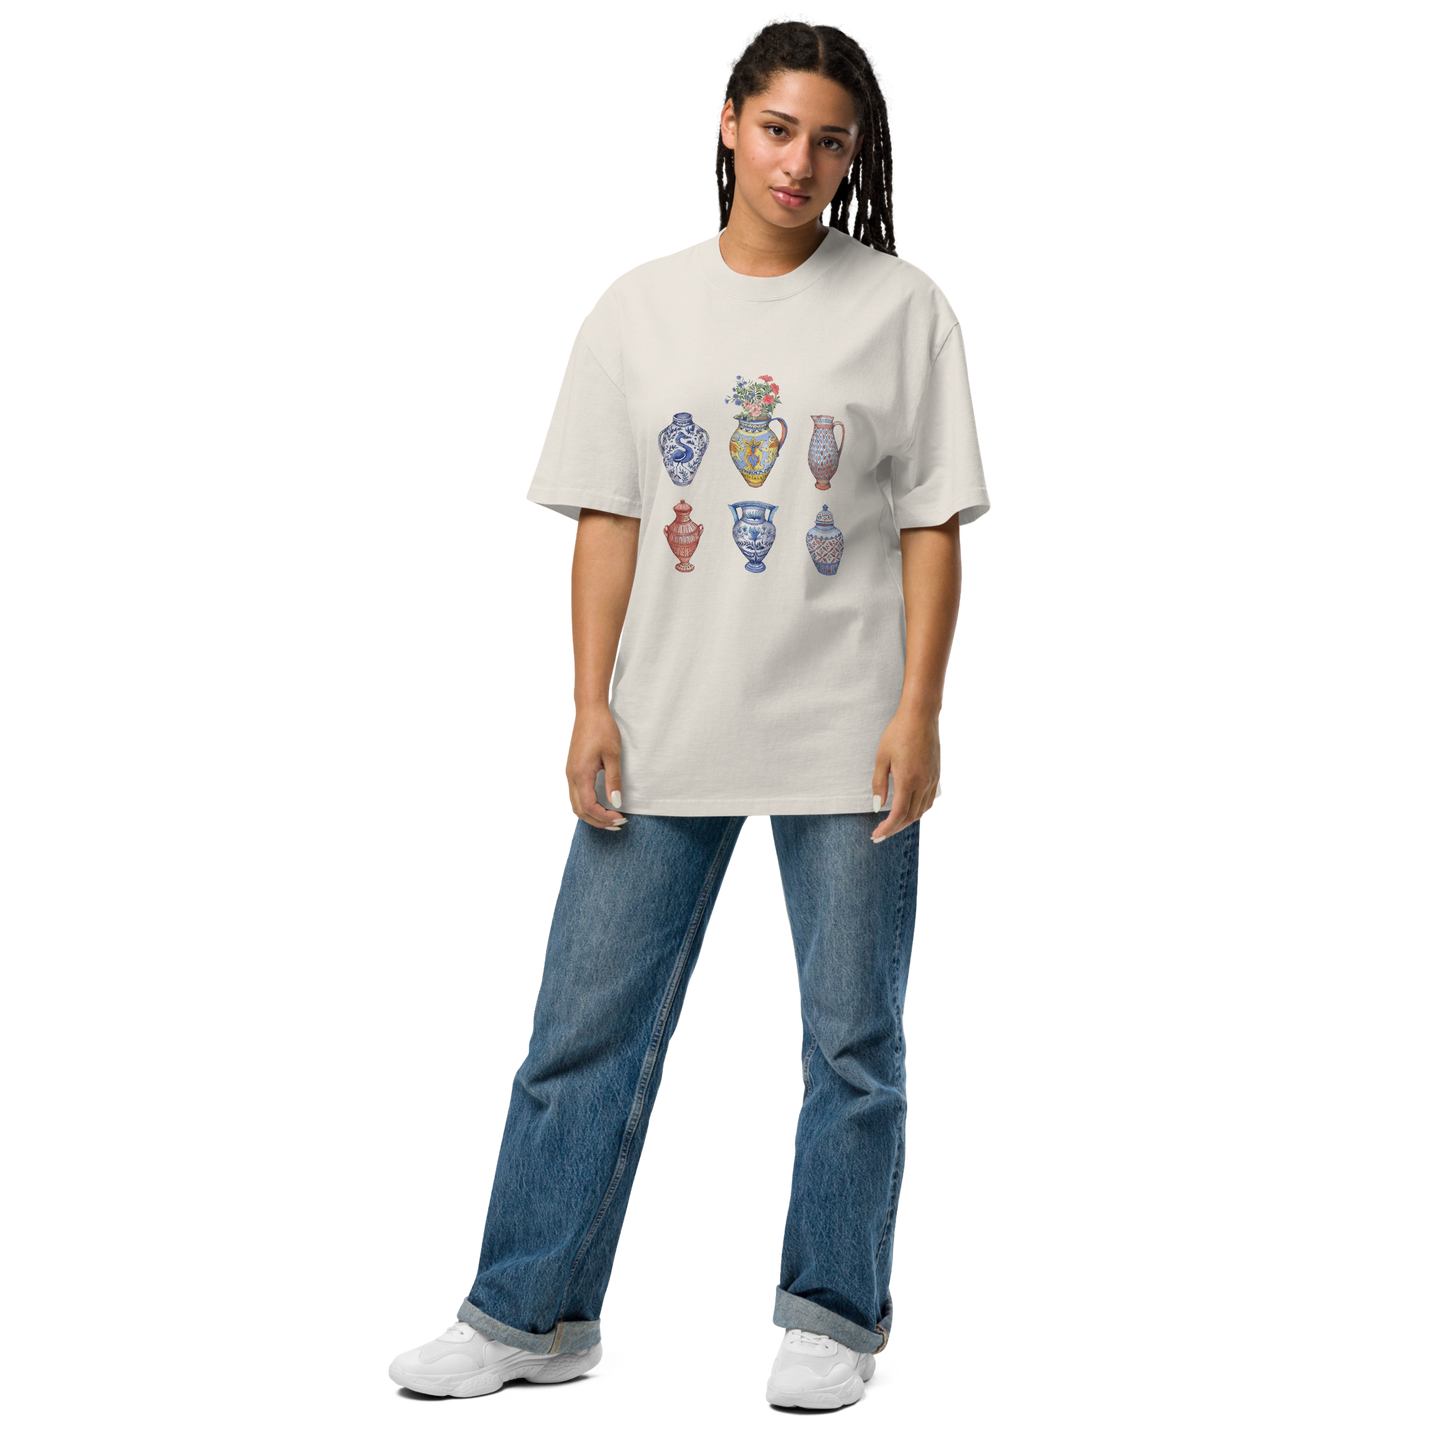 Woman wearing a Faded Bone Vase Oversized T-Shirt featuring a chic vase graphic on the chest - Artsy Graphic Vase Oversized Tees - Boozy Fox